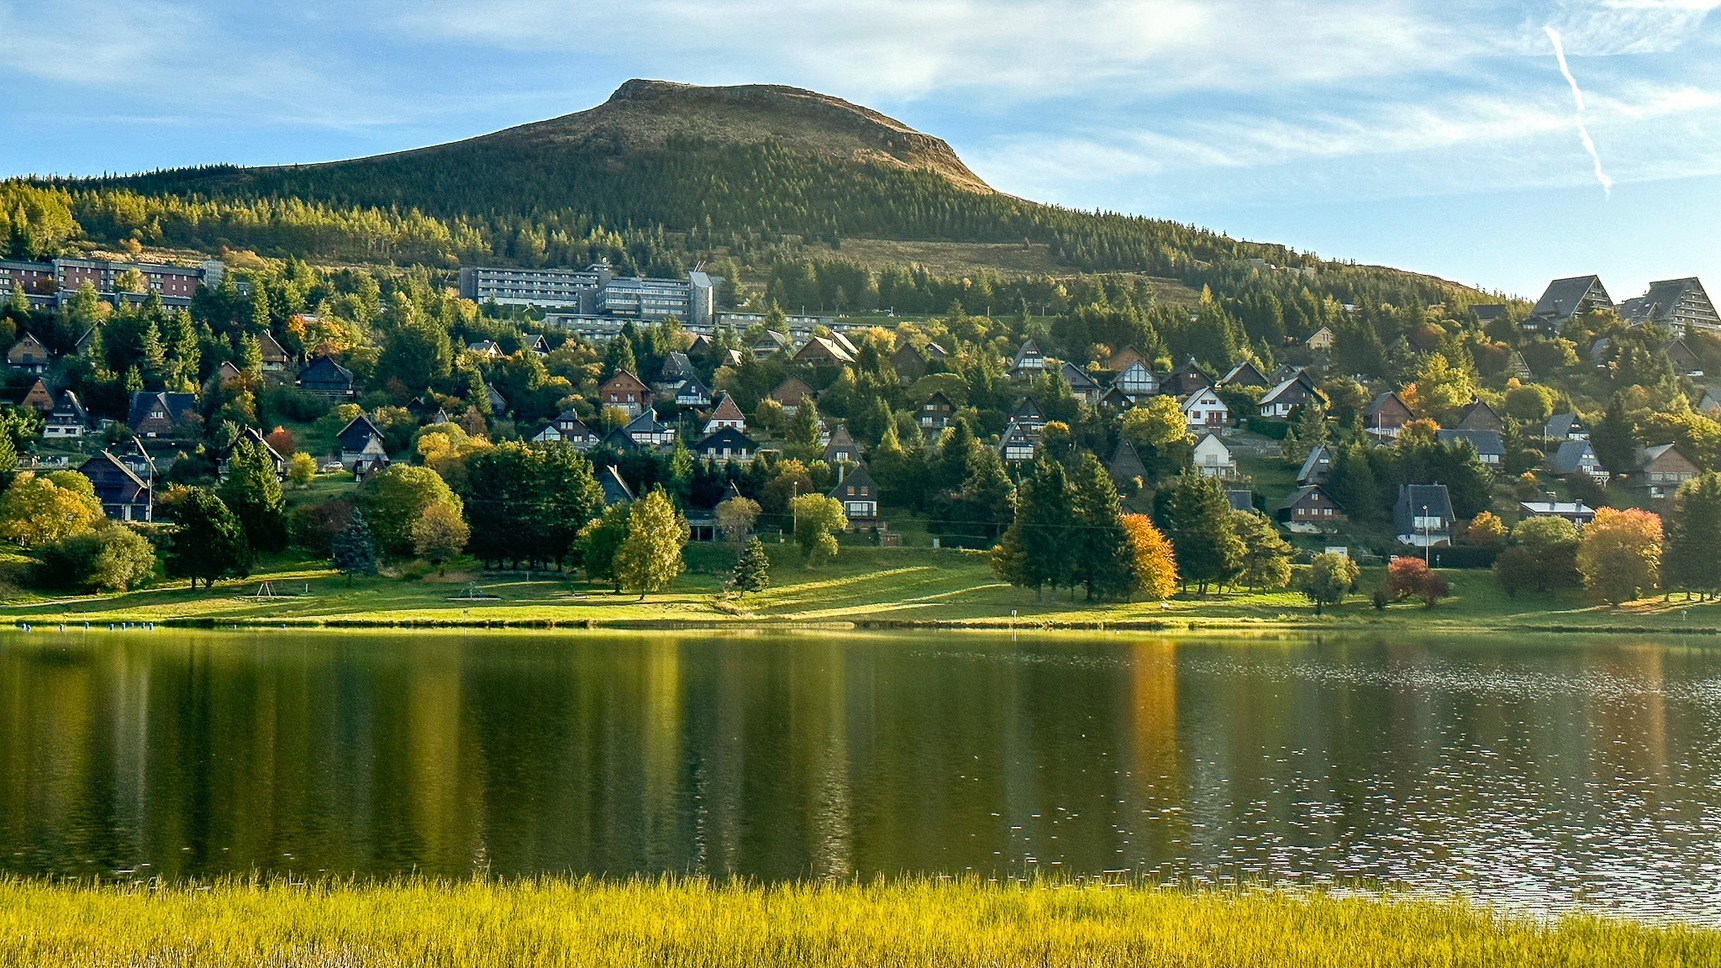 Super Besse, the chalet village of Super Besse in the colors of Autumn